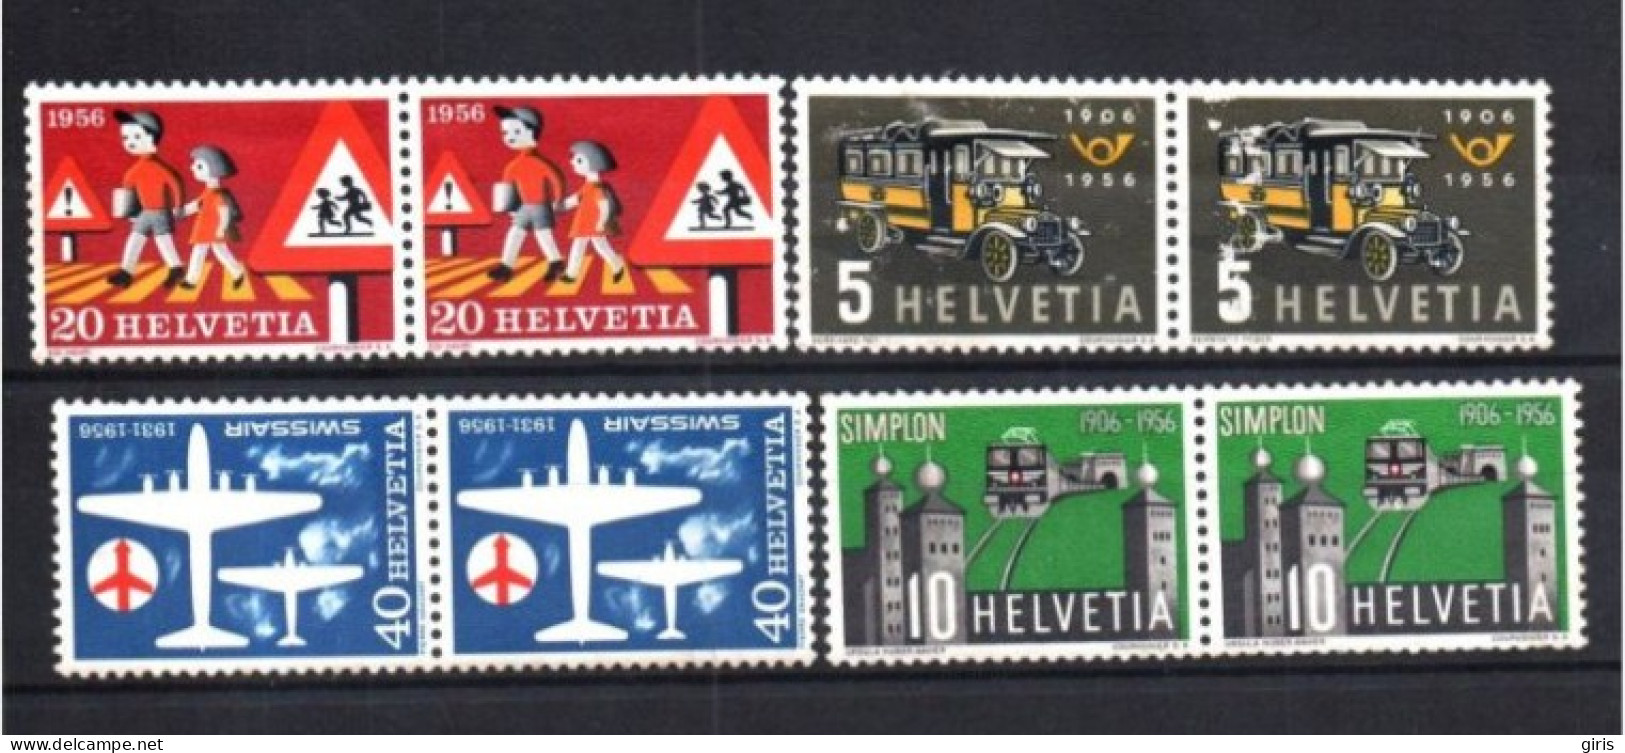 Suisse - Helvetia - Switzerland - N° YT 572/575 ** - Propagande - Série Complète 1934 - Used Stamps